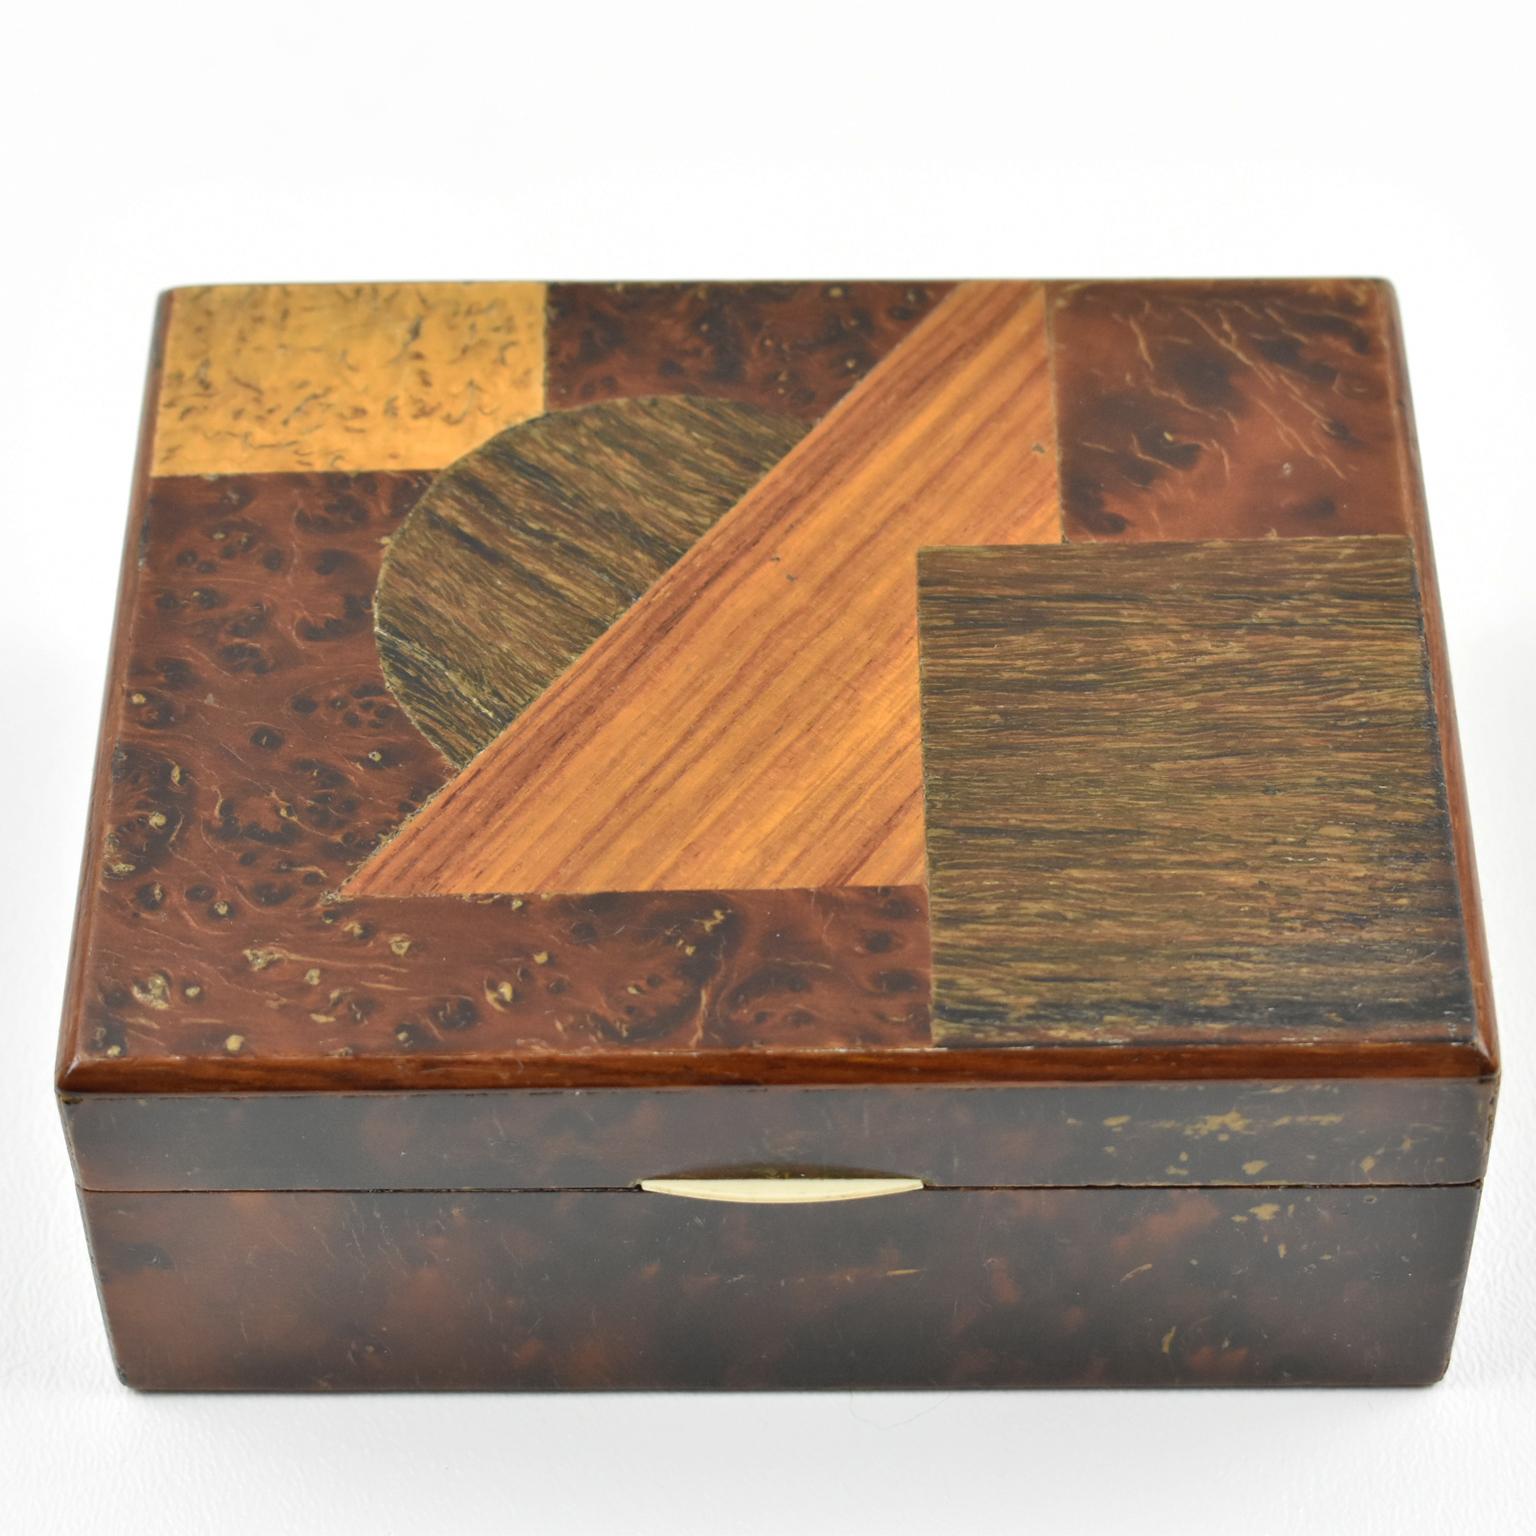 Mid-20th Century Art Deco Modernist Burl Wood Box with Wooden Marquetry